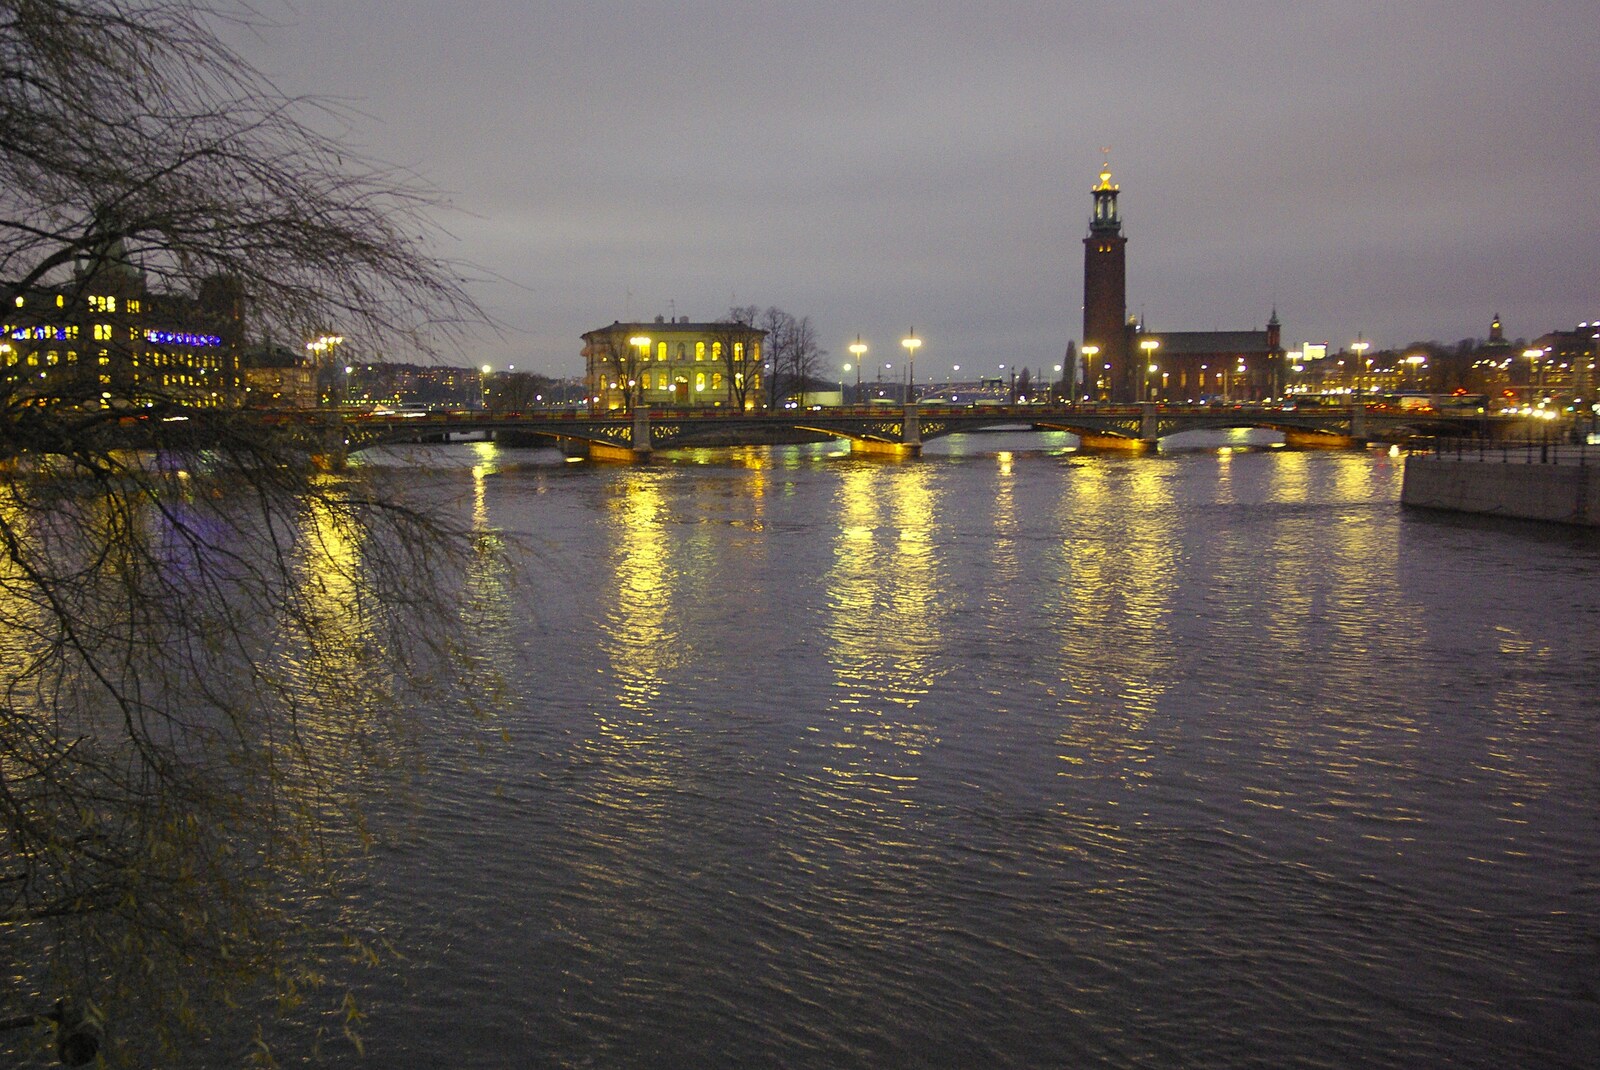 Looking over the water towards the Stadshuset from Gamla Stan, Stockholm, Sweden - 15th December 2007